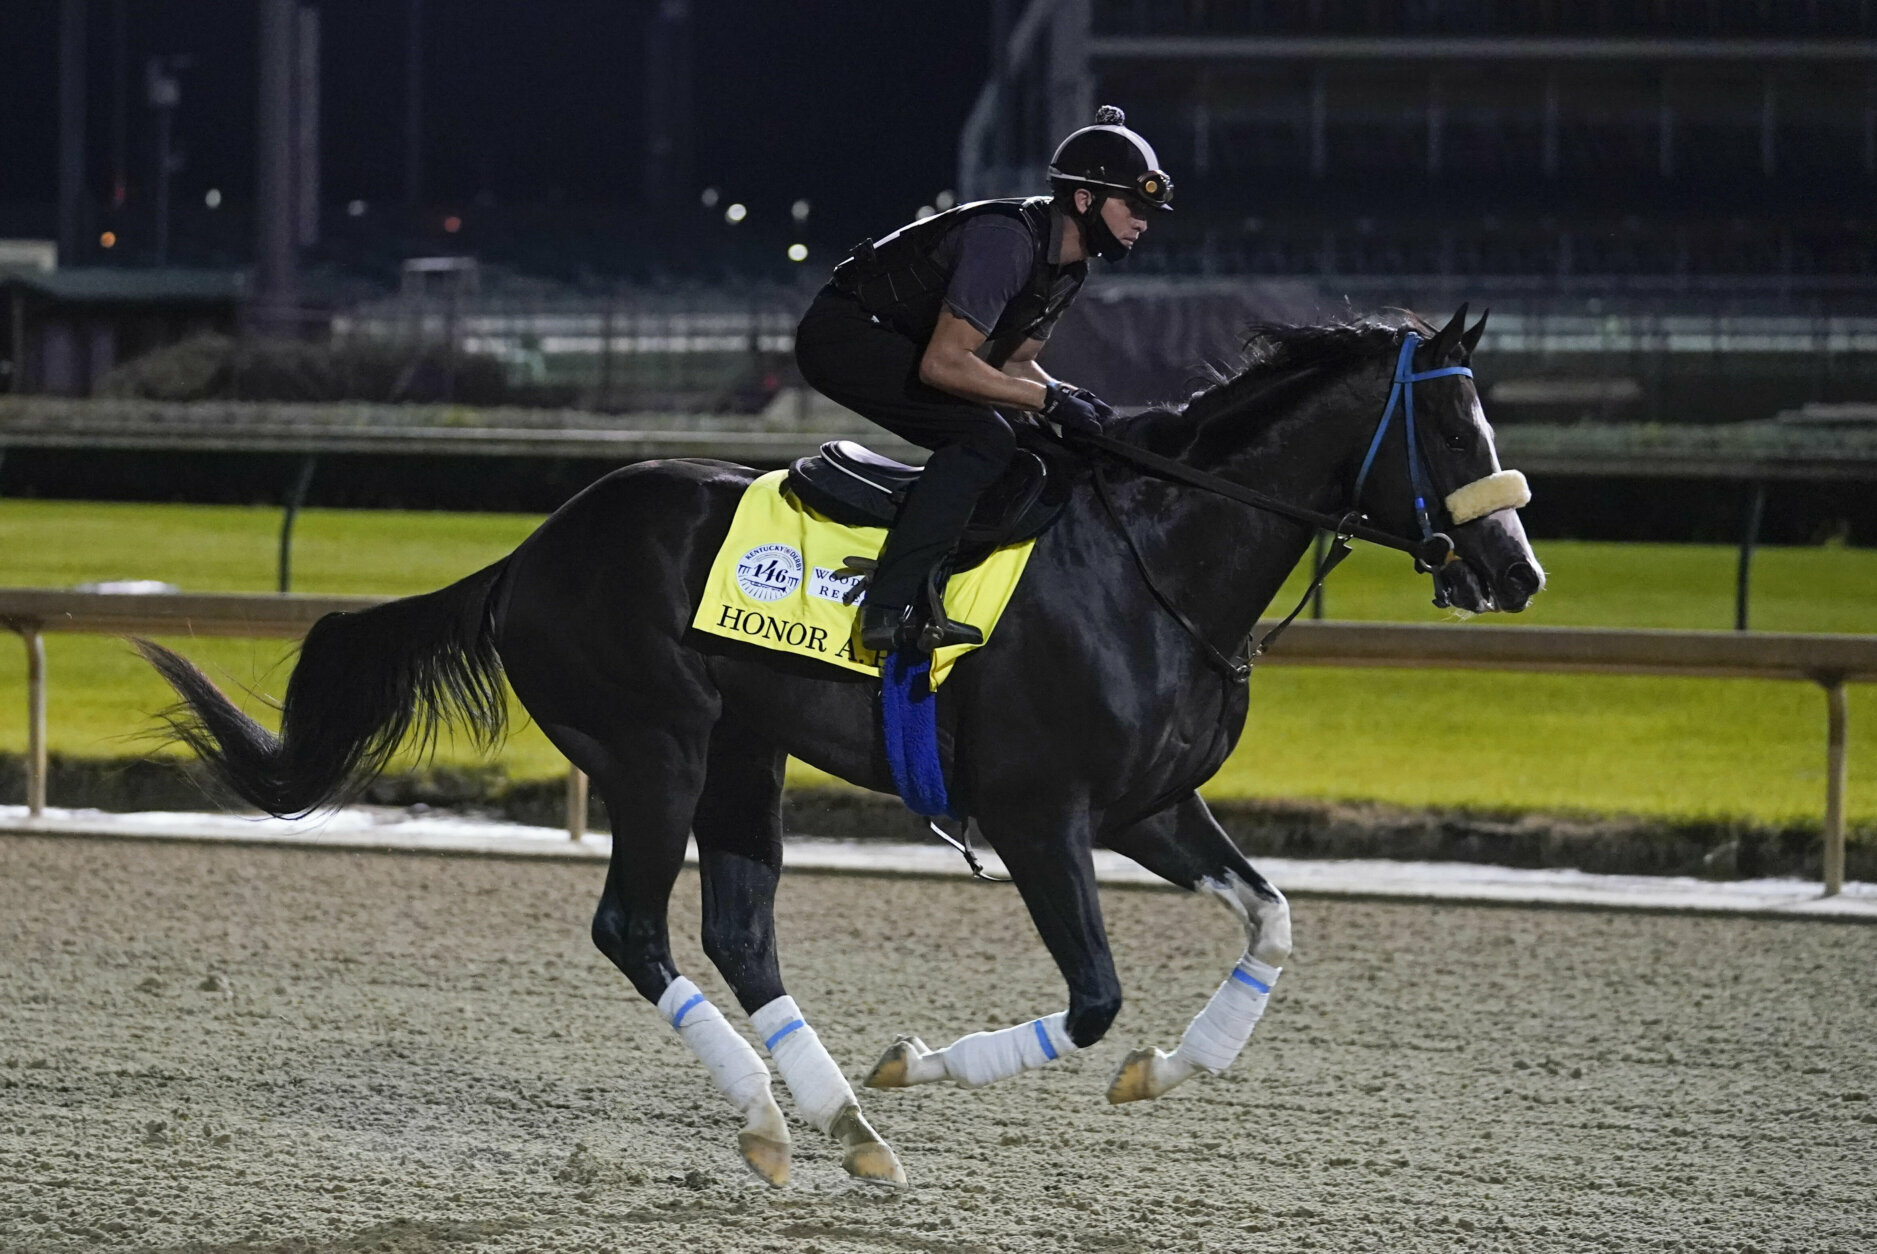 Kentucky Derby entry Honor A. P. runs during a workout at Churchill Downs, Friday, Sept. 4, 2020, in Louisville, Ky. The Kentucky Derby is scheduled for Saturday, Sept. 5th. (AP Photo/Darron Cummings)